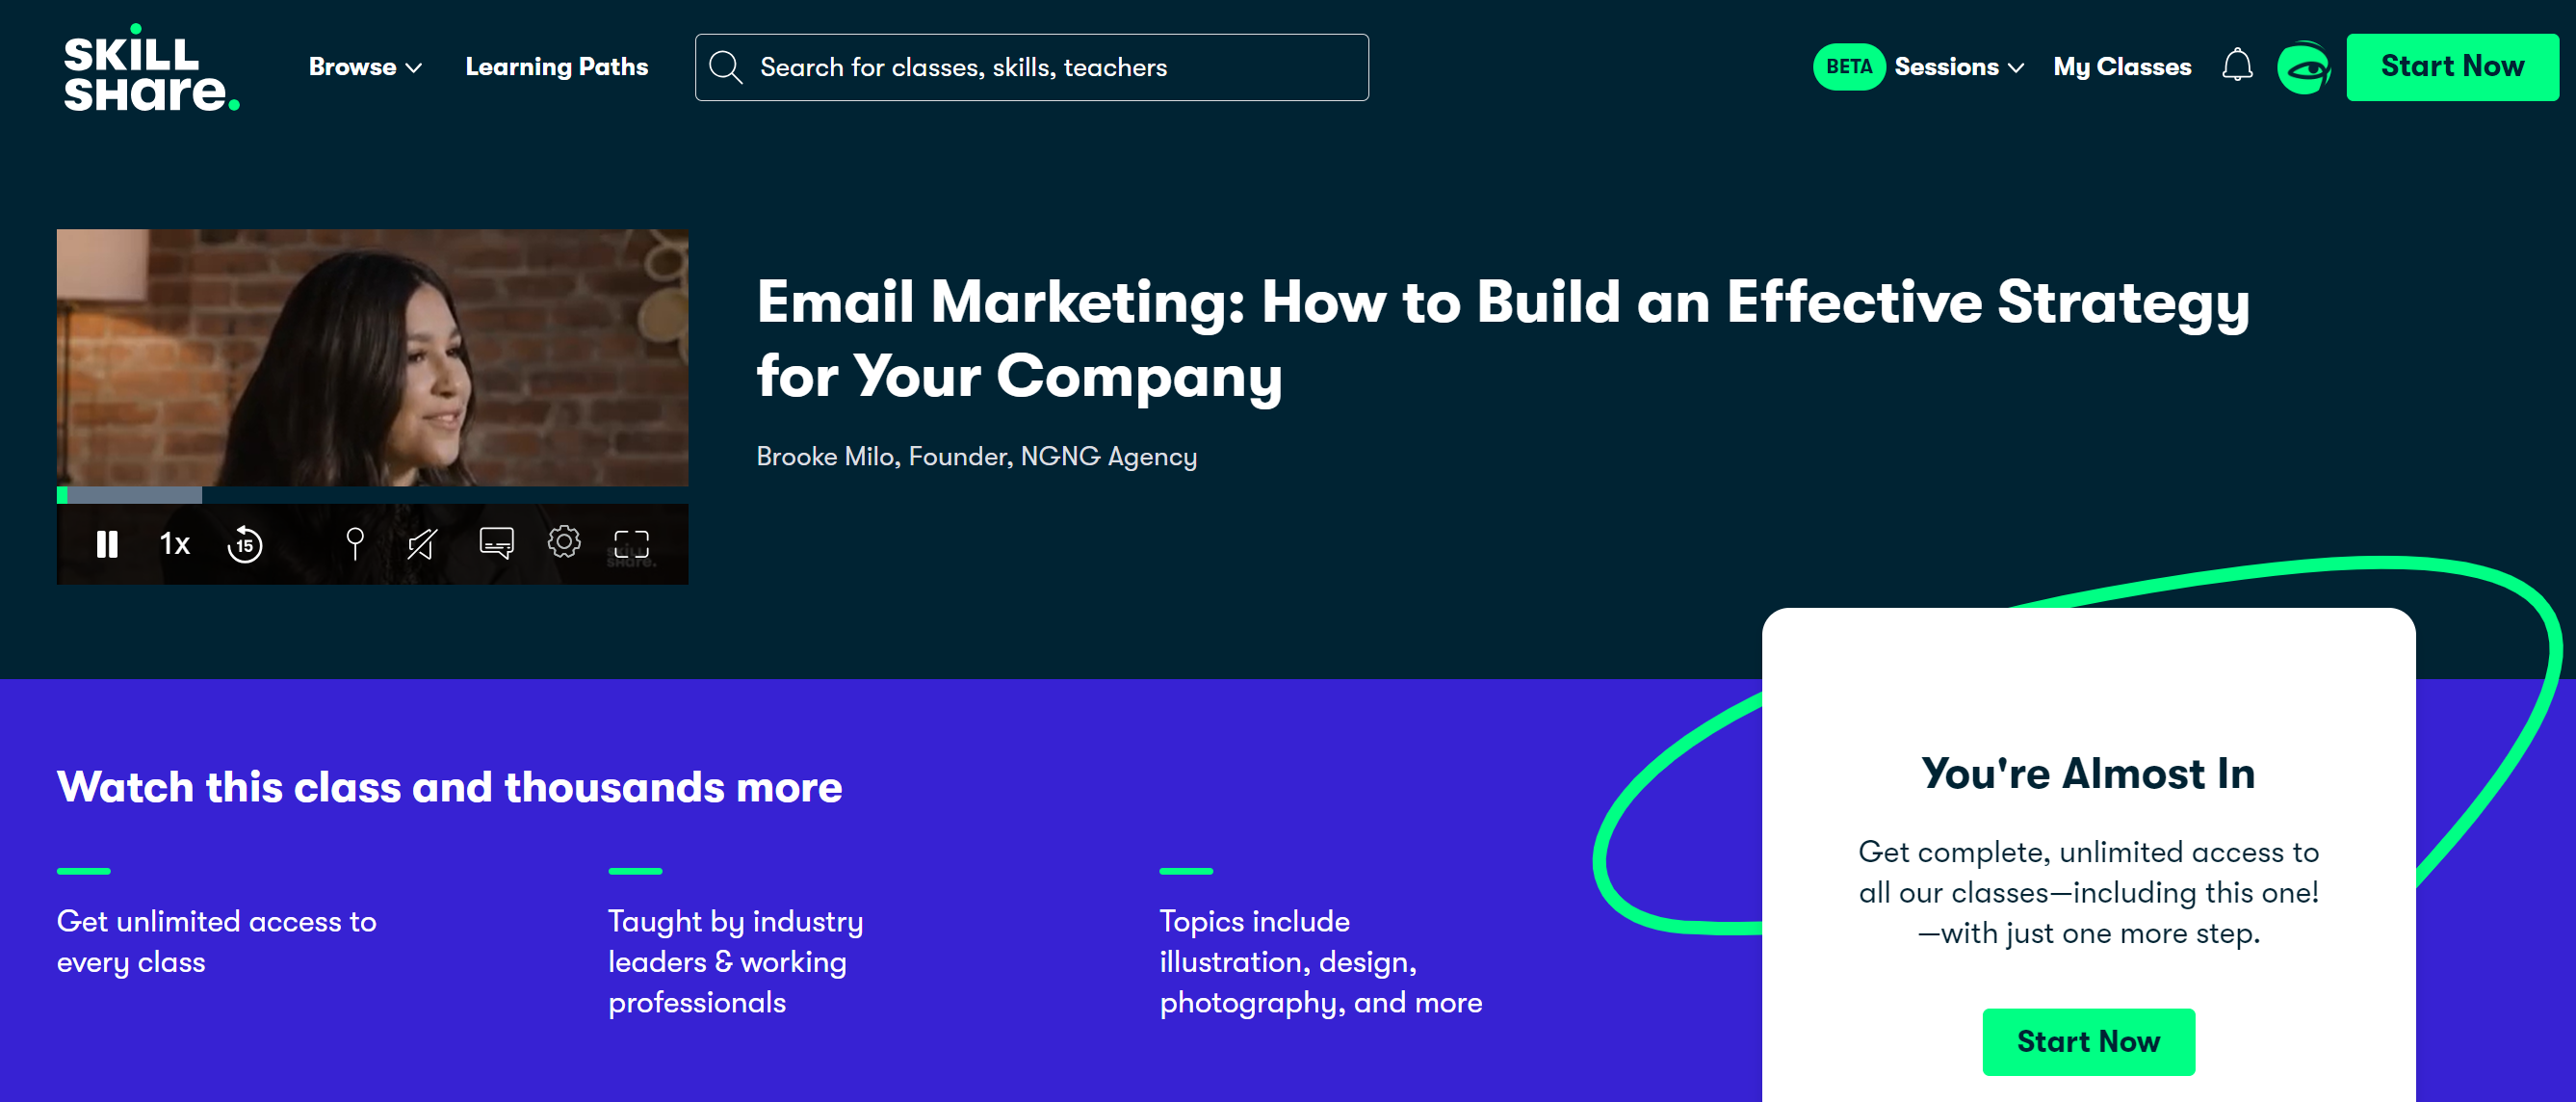 Email Marketing: How to Build an Effective Strategy for Your Company via Skillshare